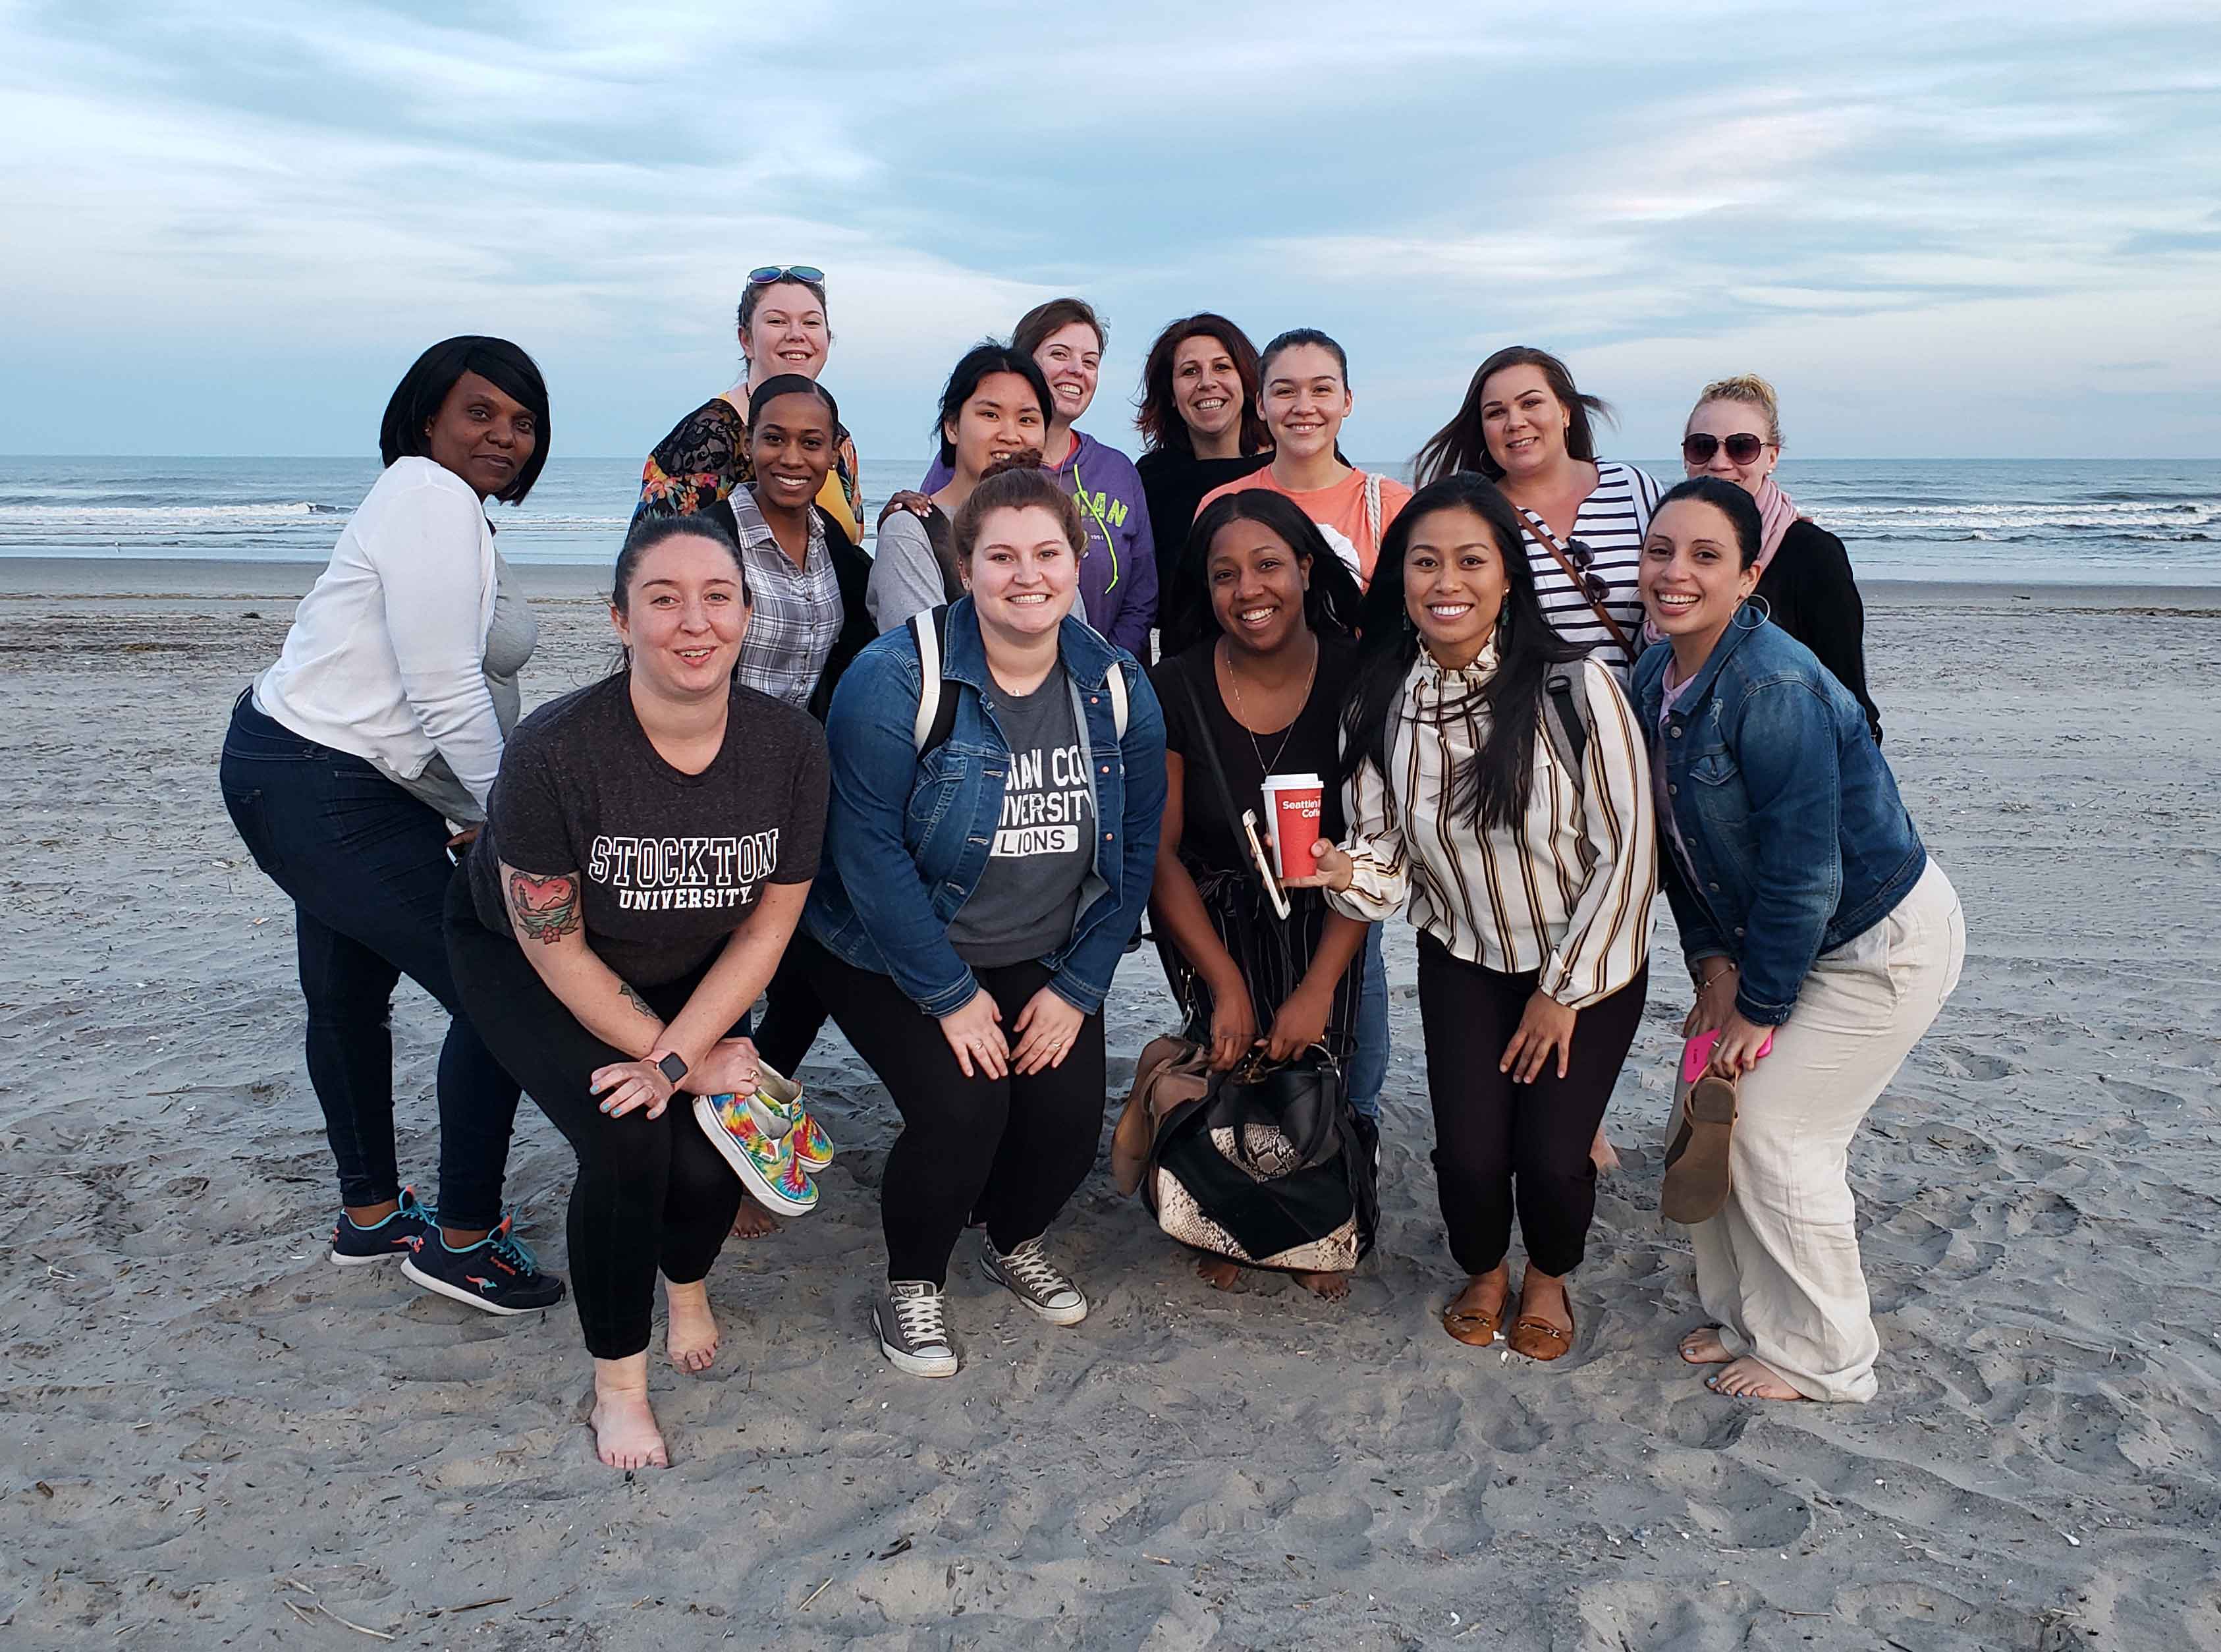 MSW Grad students smiling on beach